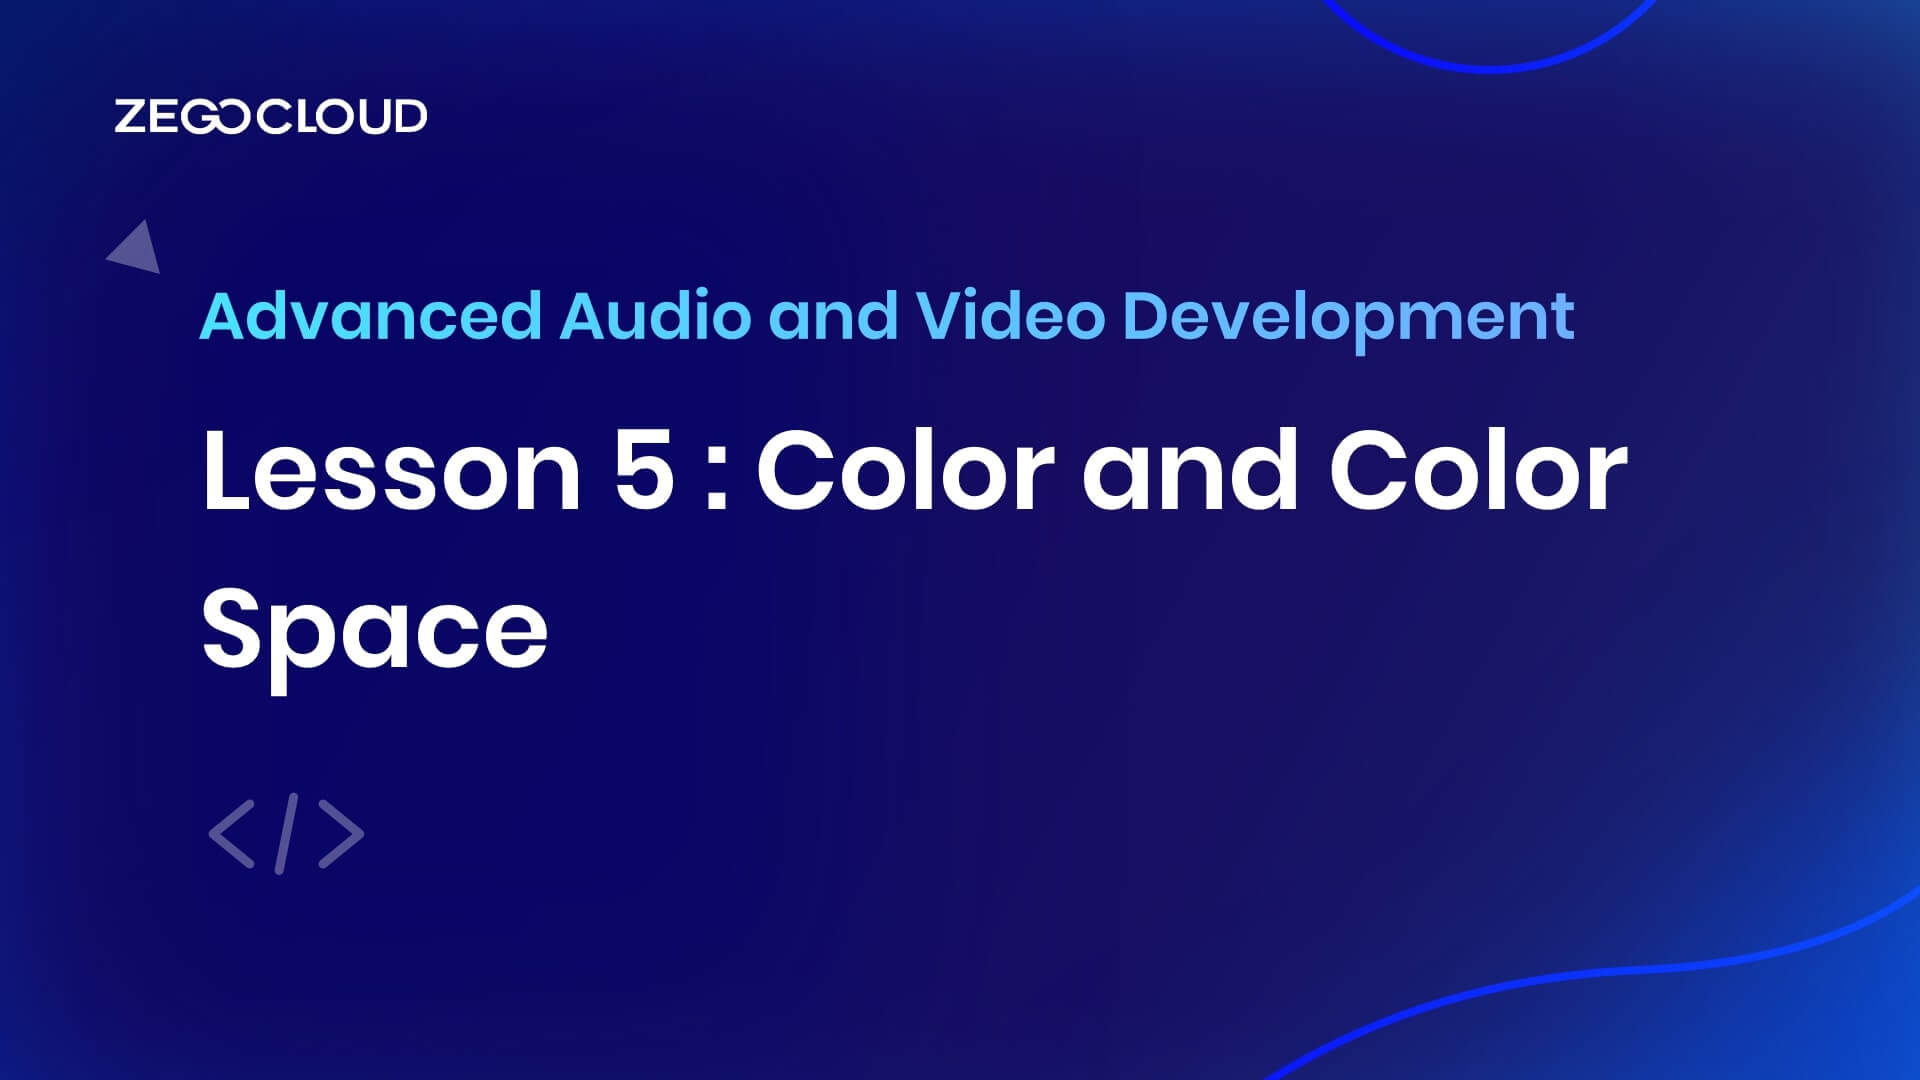 Lesson 5: Color and Color Space